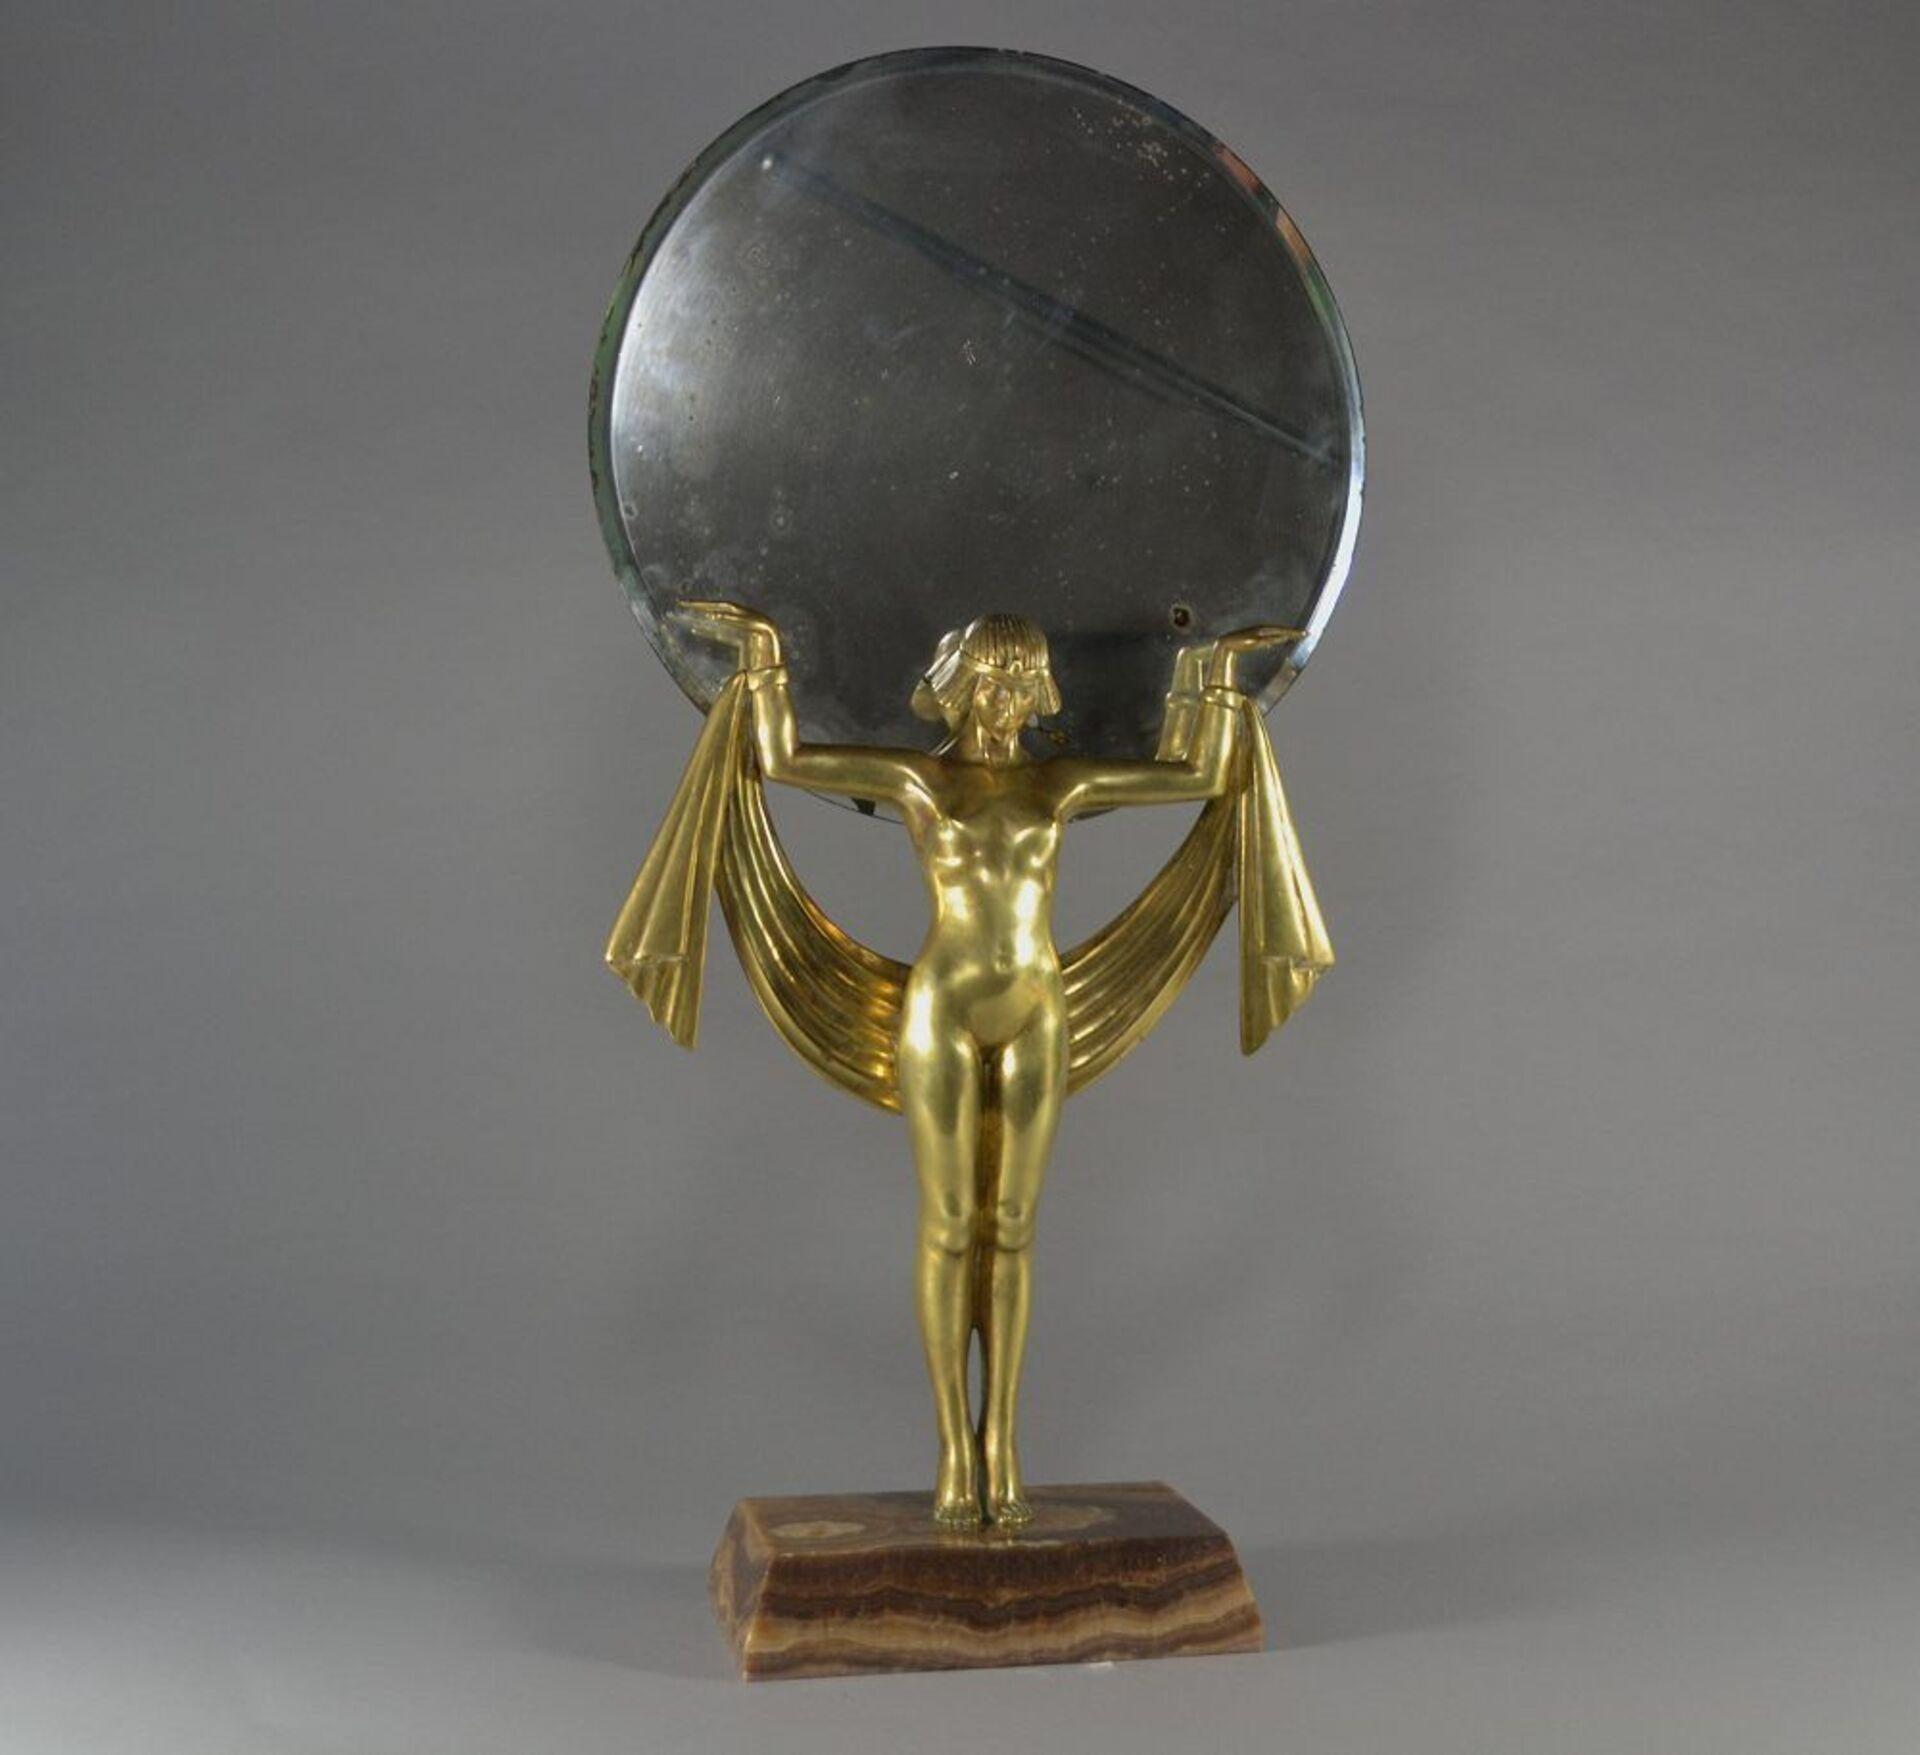 A very elegant bronze Egyptian dancer with scarf figural mirror.
Bronze in excellent condition. Mirror (that is original to the figure) shows some wear on silver. (easy to replace... but keep the original one somewhere please ! Precious !)
Marble